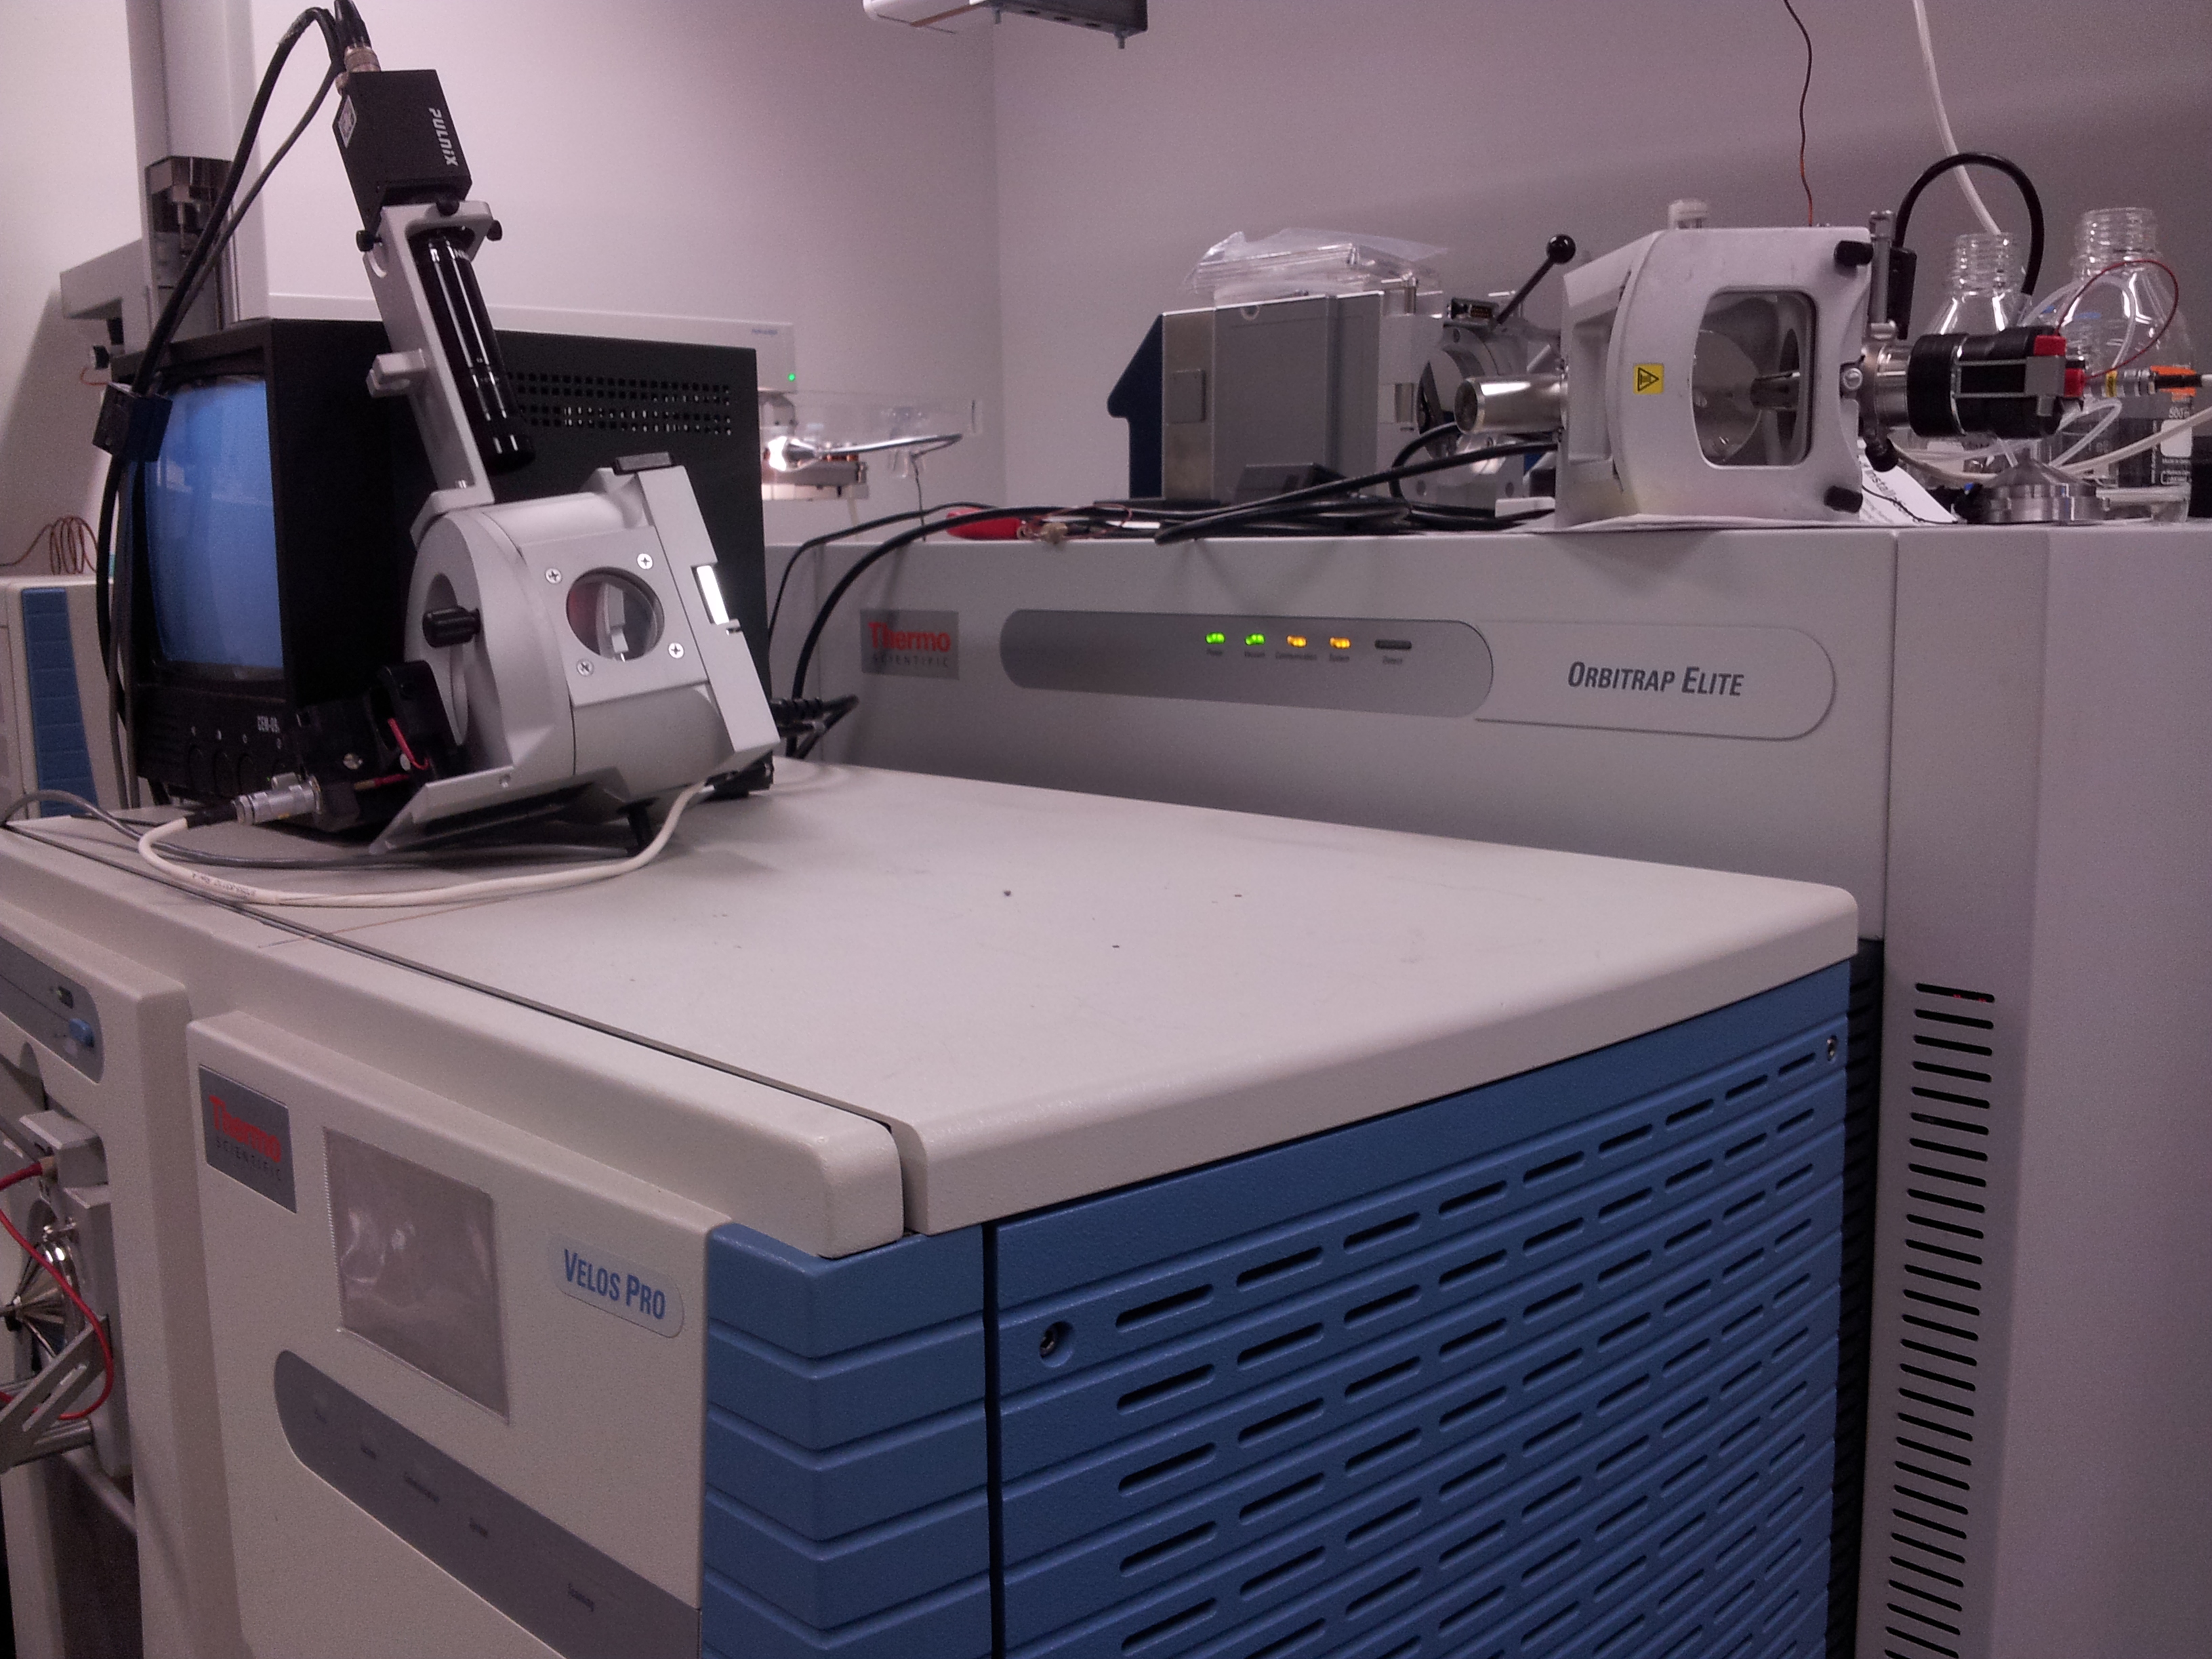 Photograph of the Elite Orbitrap used in the proteomics facility unit within Glasgow Polyomics